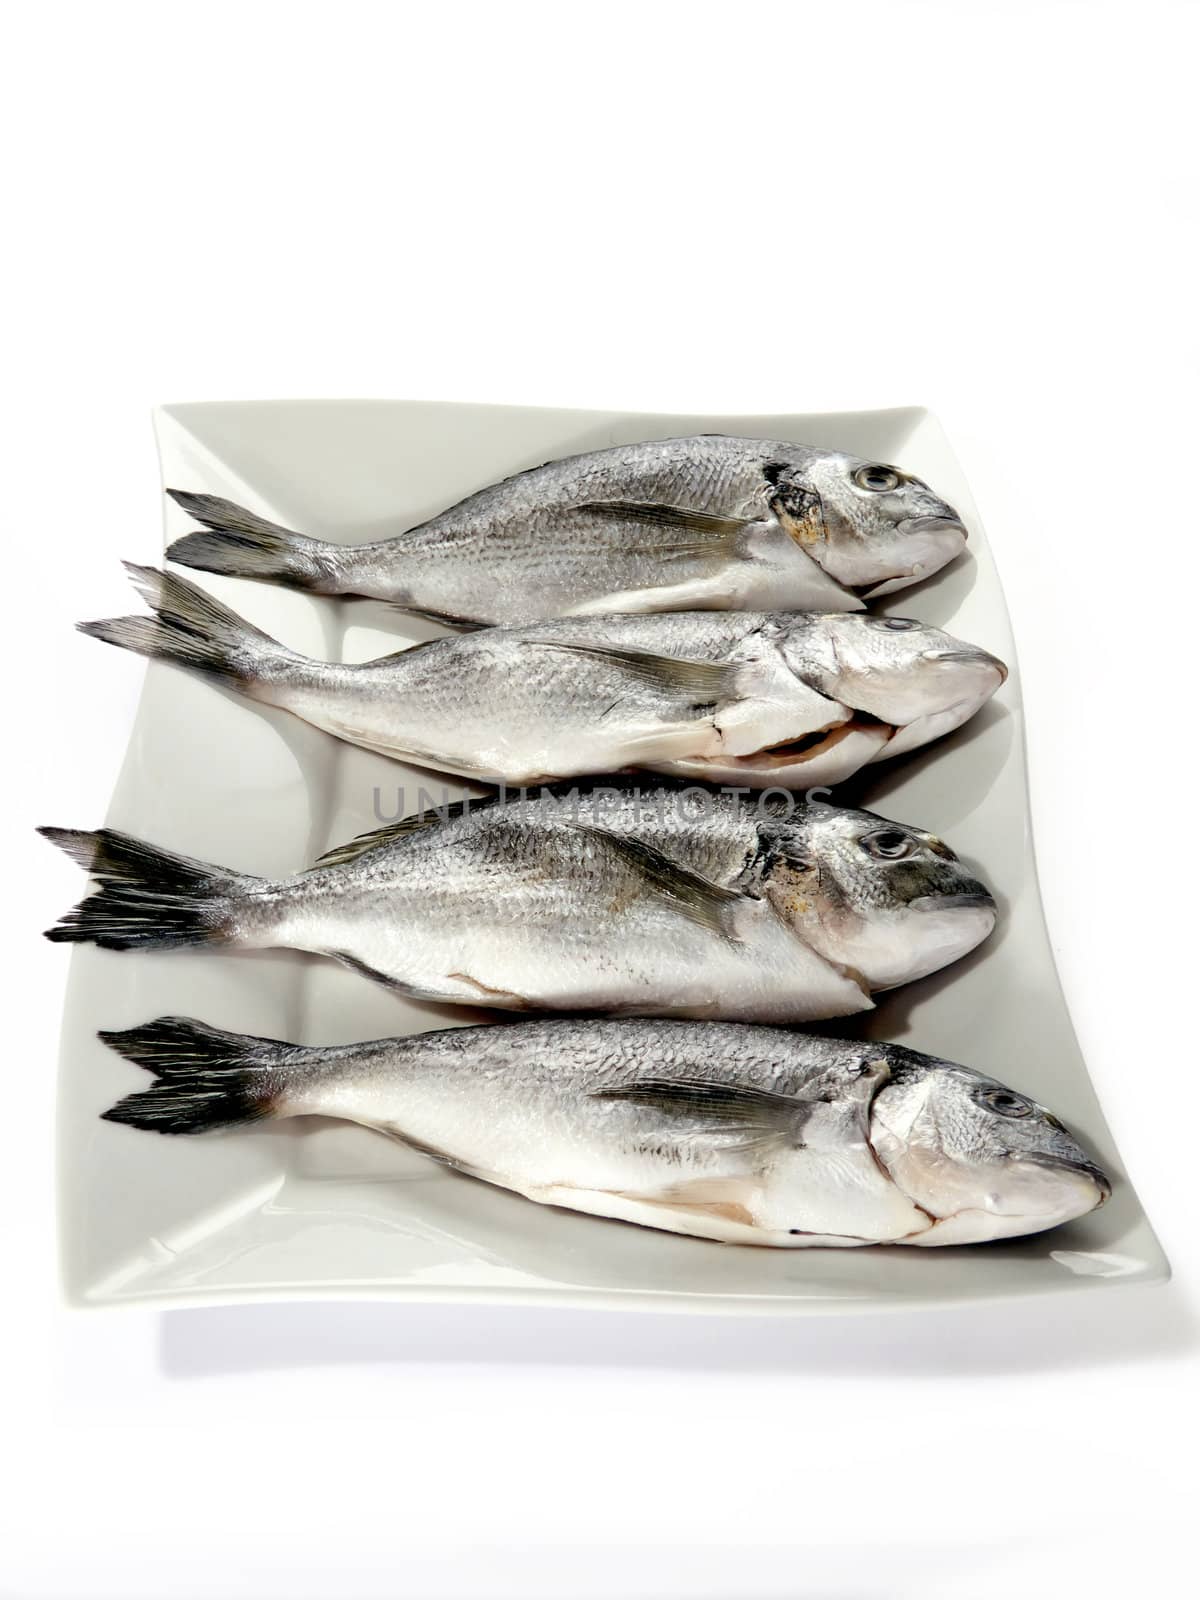 Four porgies with garnish on a white plate